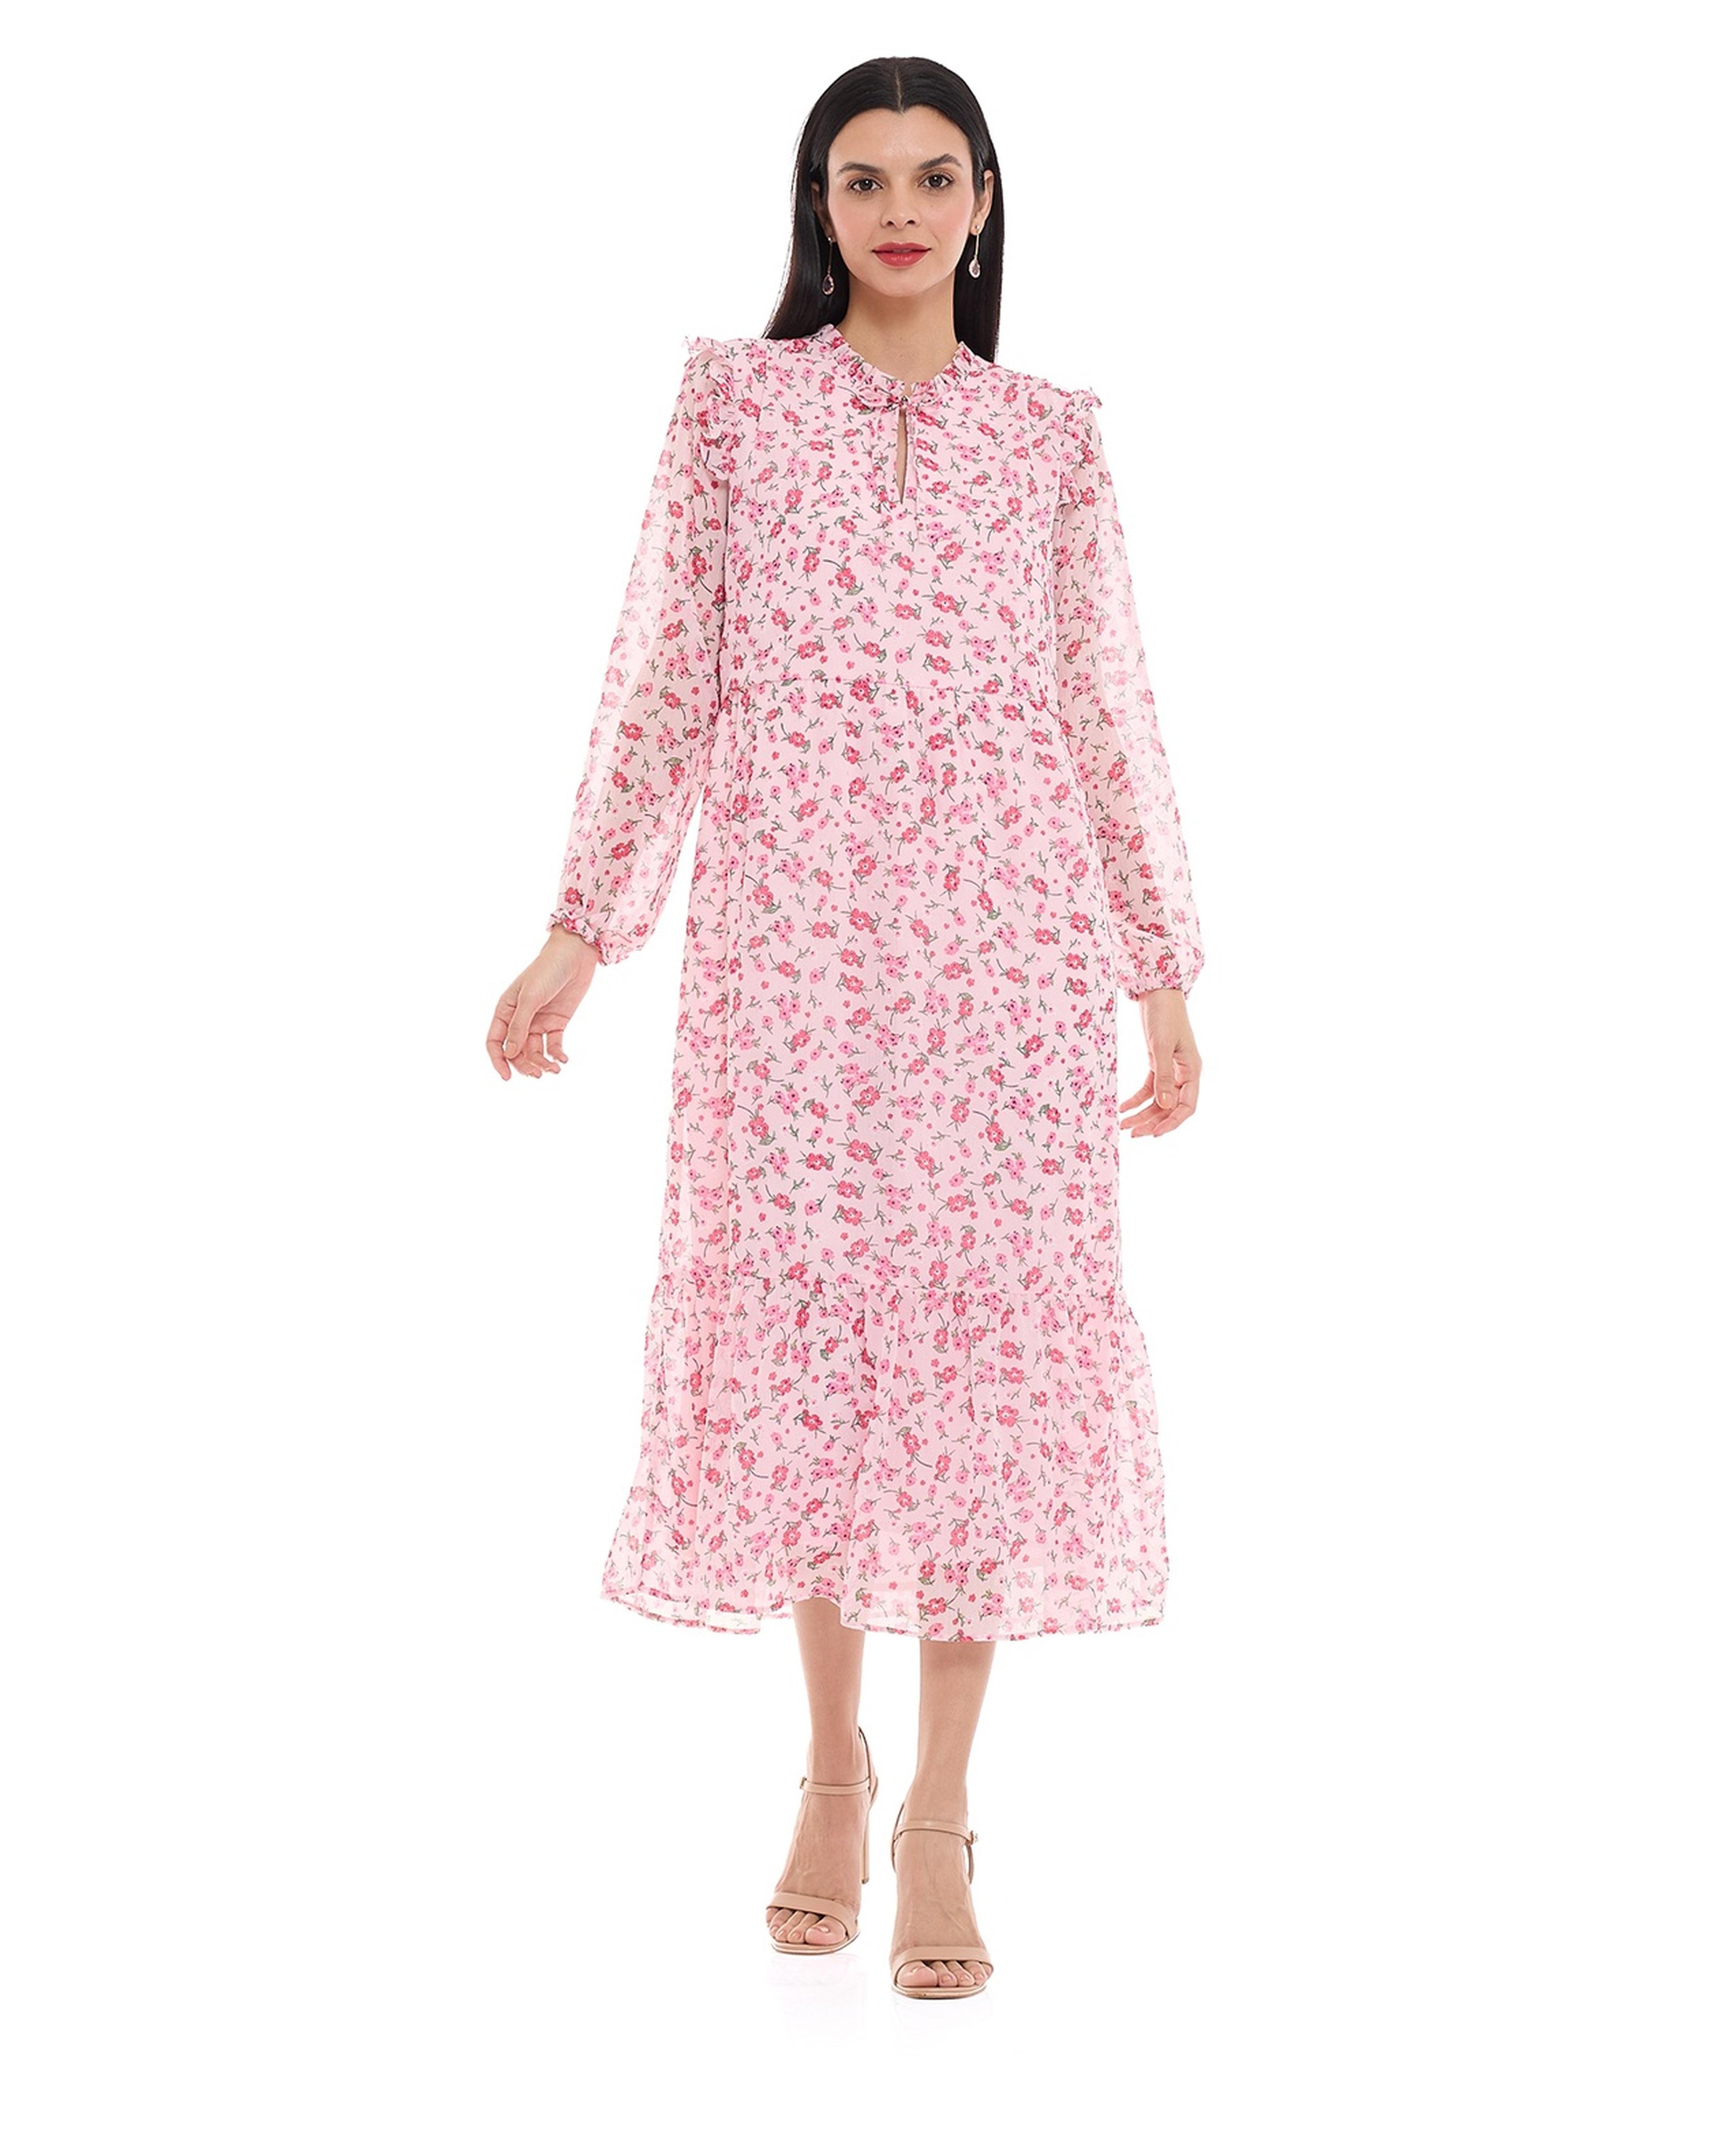 Floral Patterned Dress with Tie-Up Neck and Long Sleeves